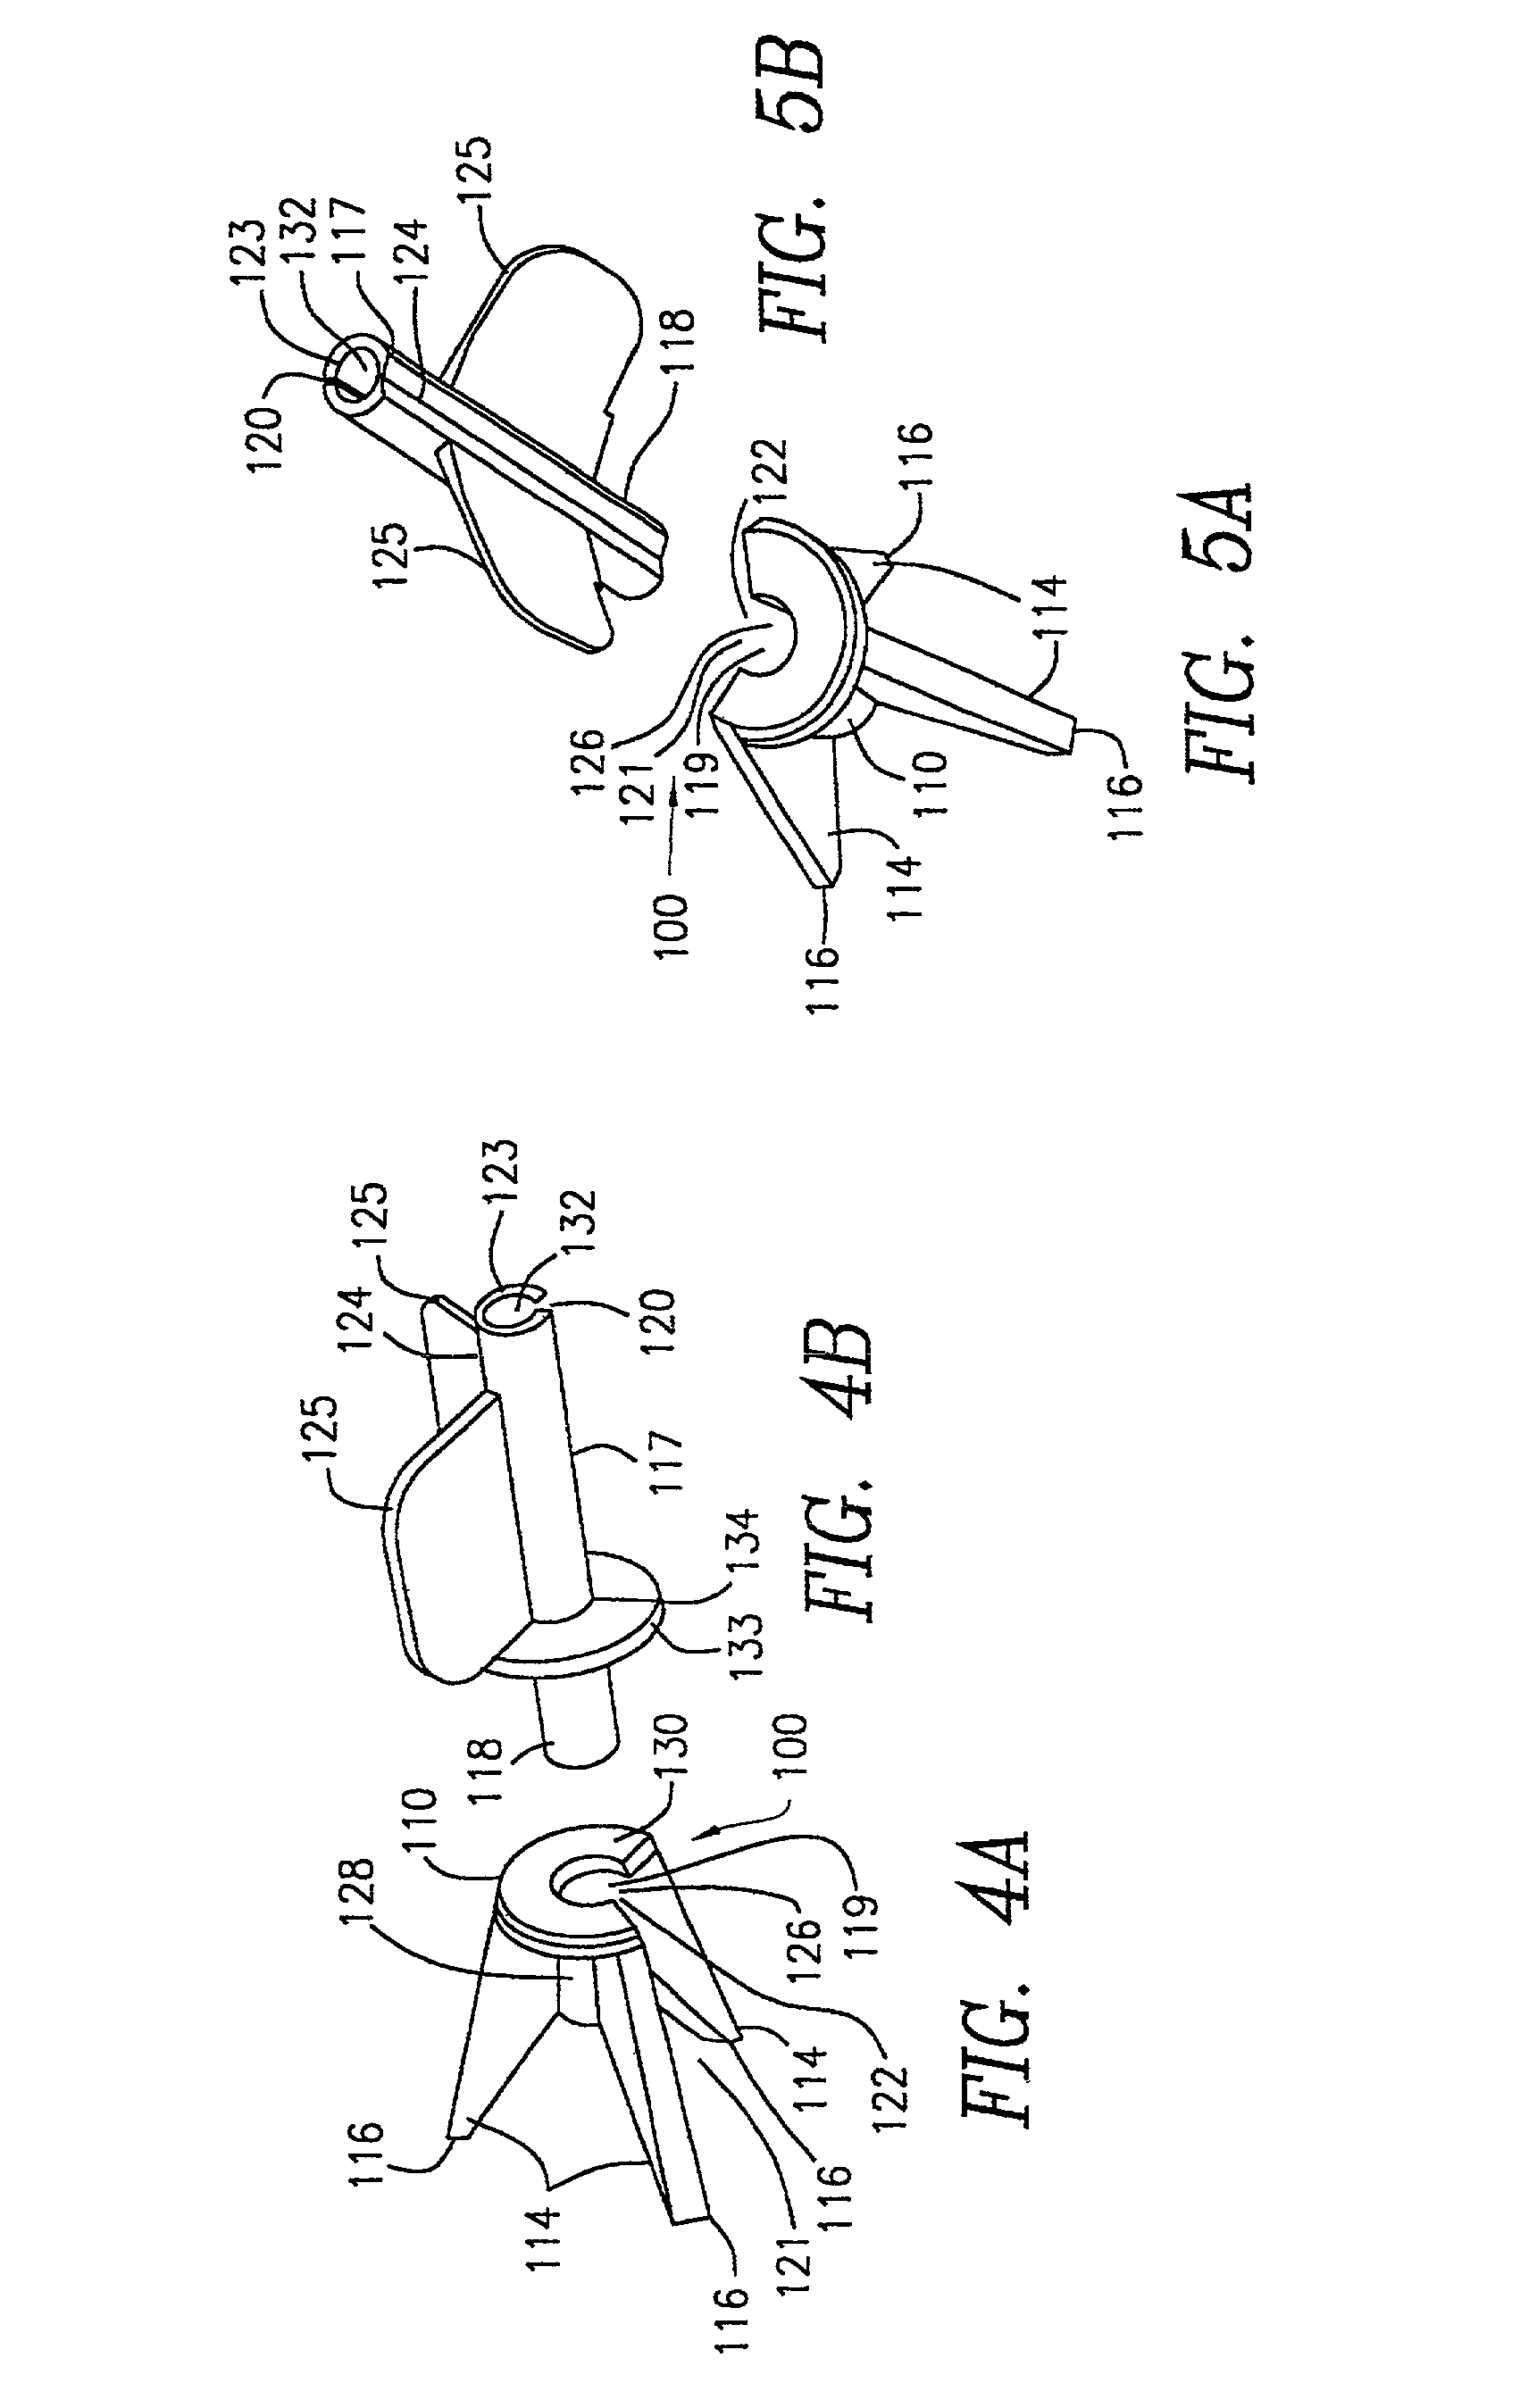 Slotted catheter guide for perpendicular insertion into a cranium orifice